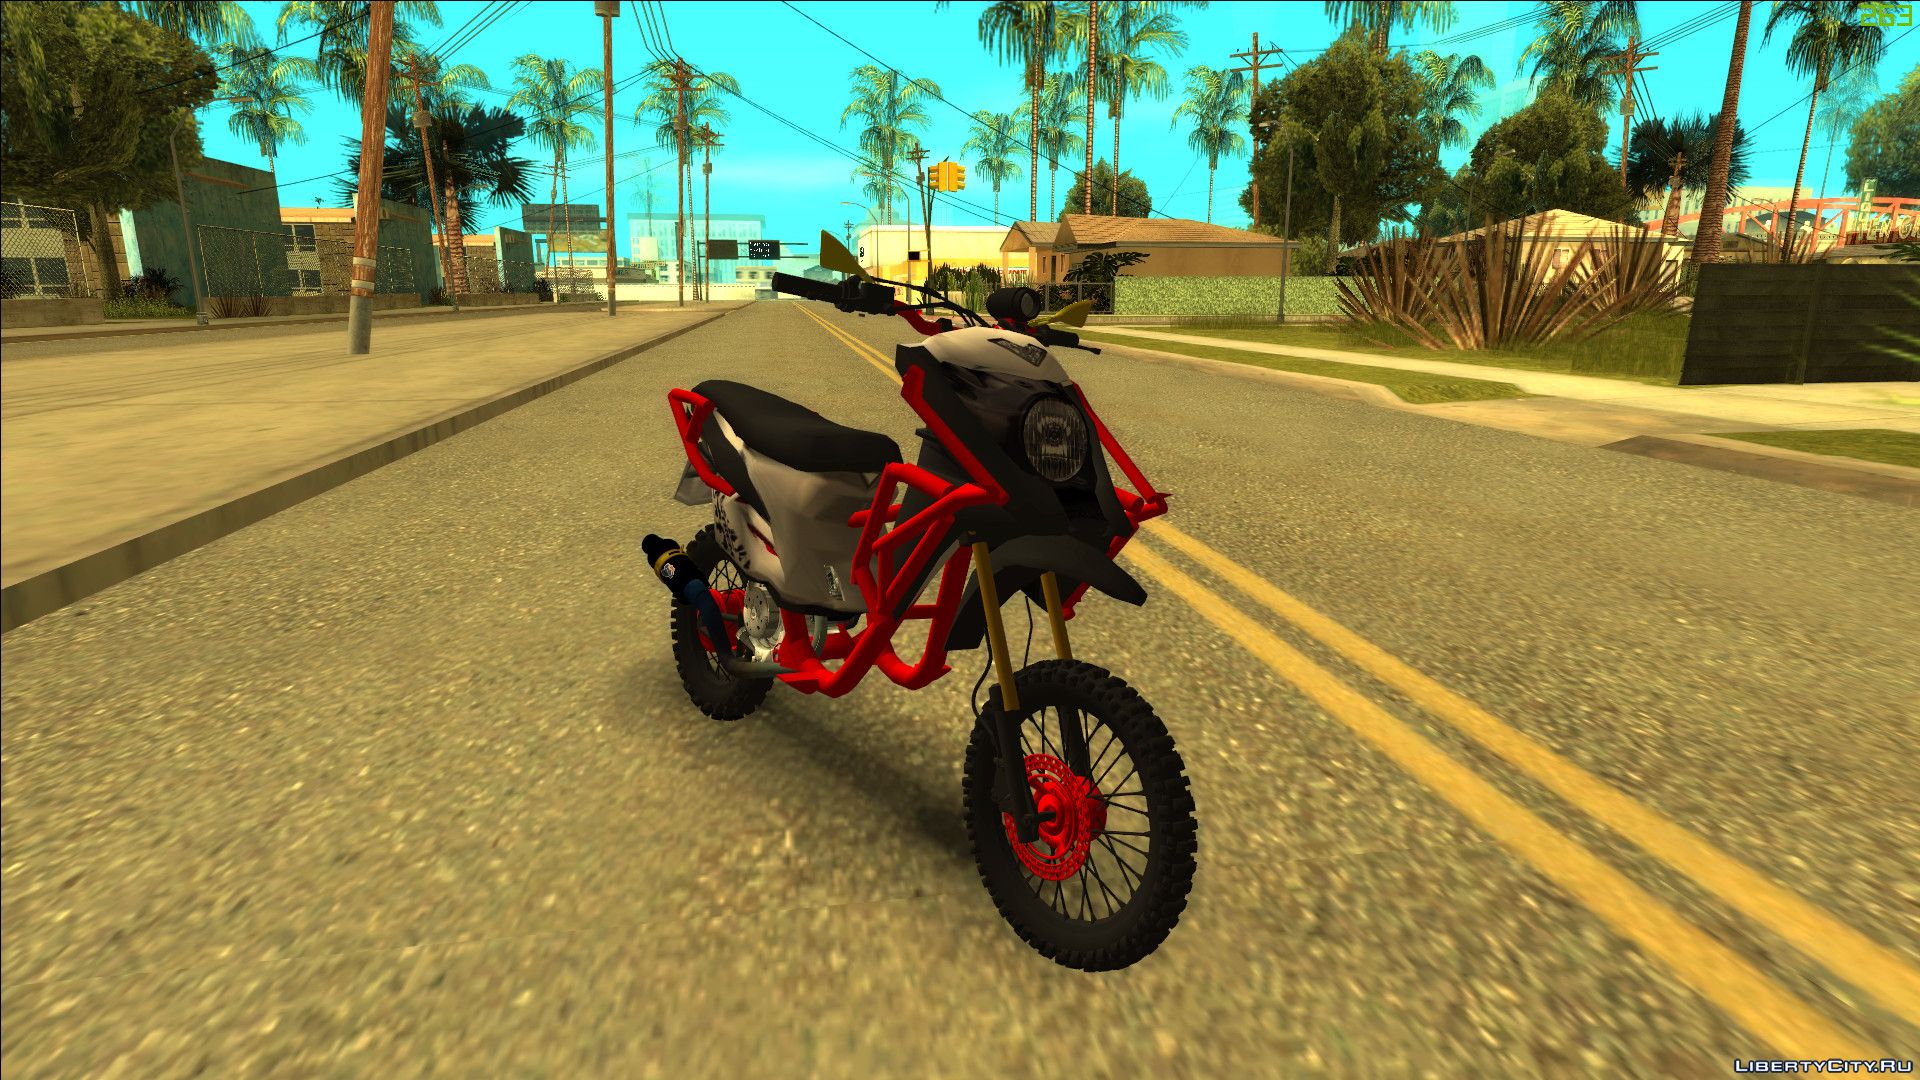 Files to replace bikev.ifp in GTA San Andreas (42 files) / Files have been  sorted by date in ascending order